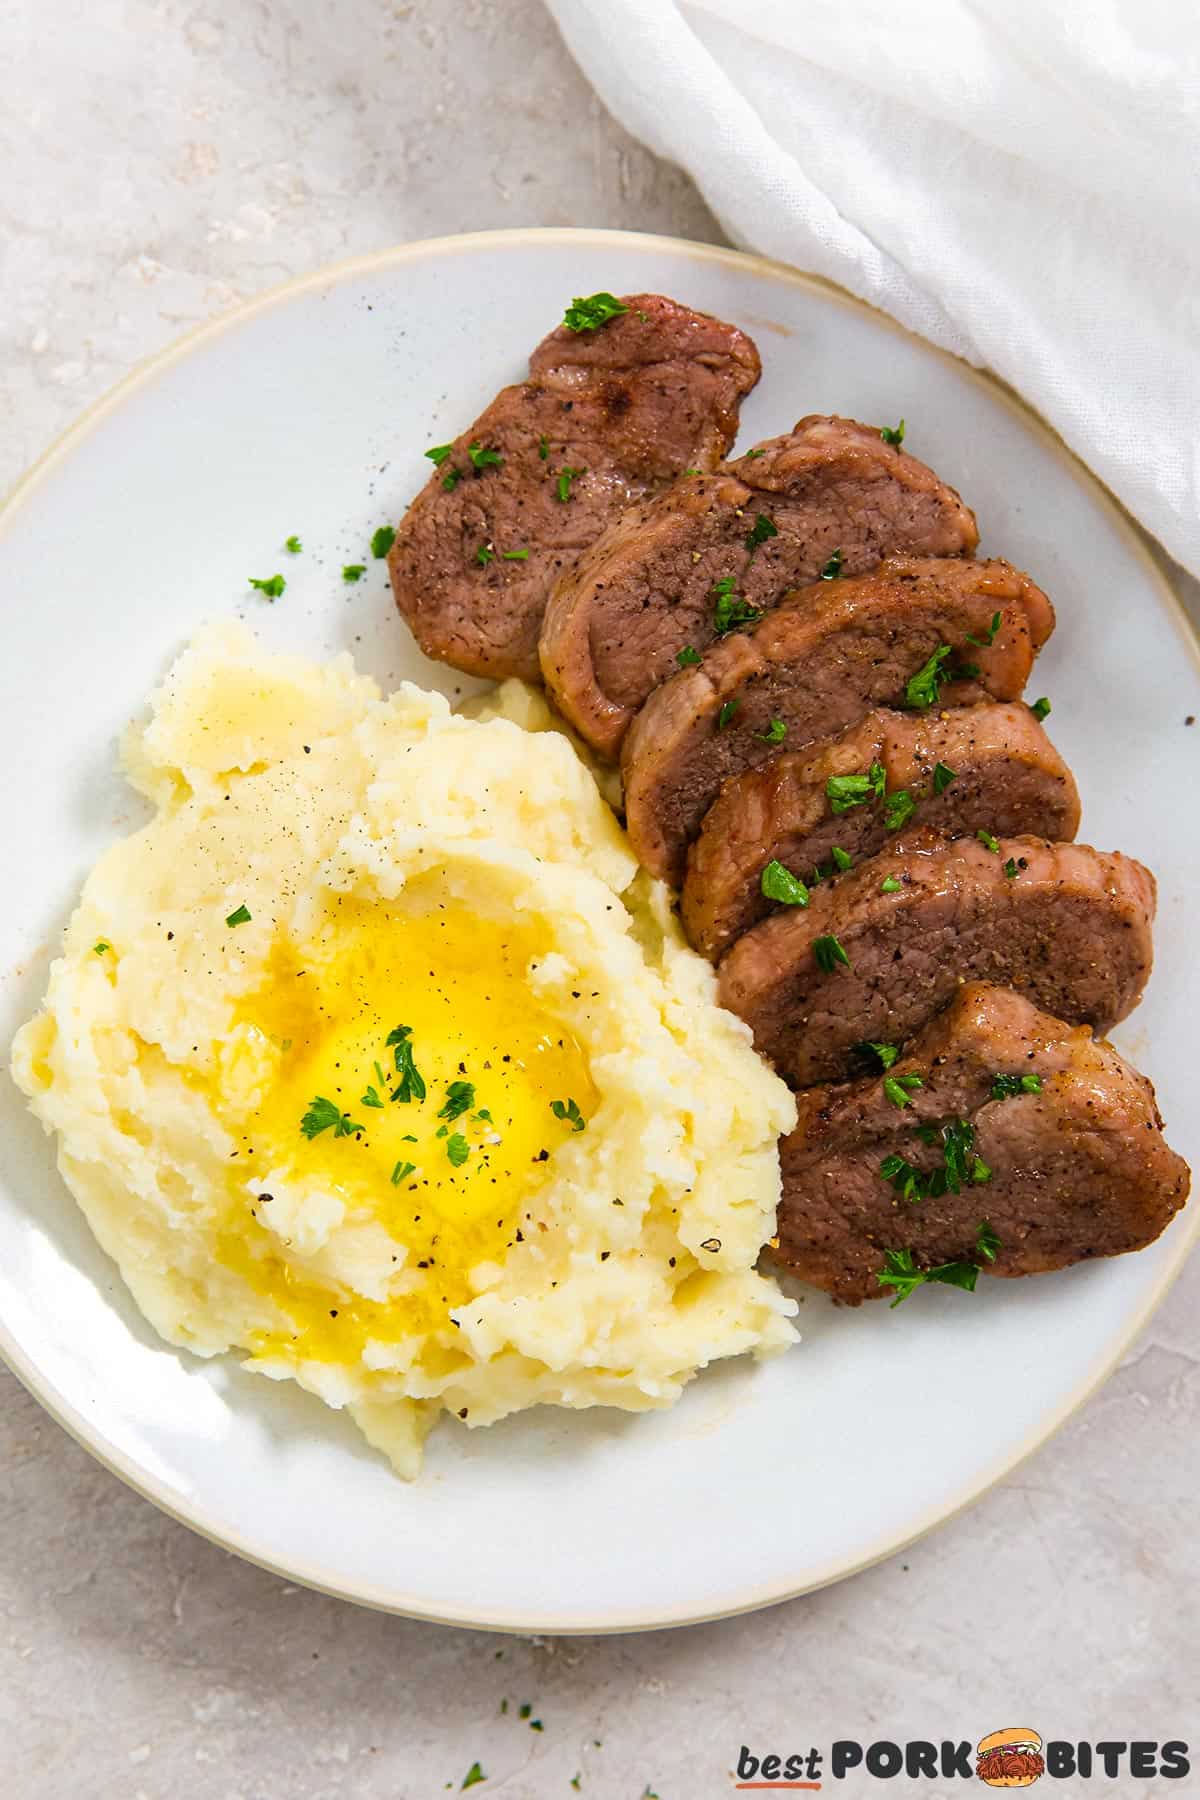 a top down image of a plate with mashed potatoes and pork tenderloin